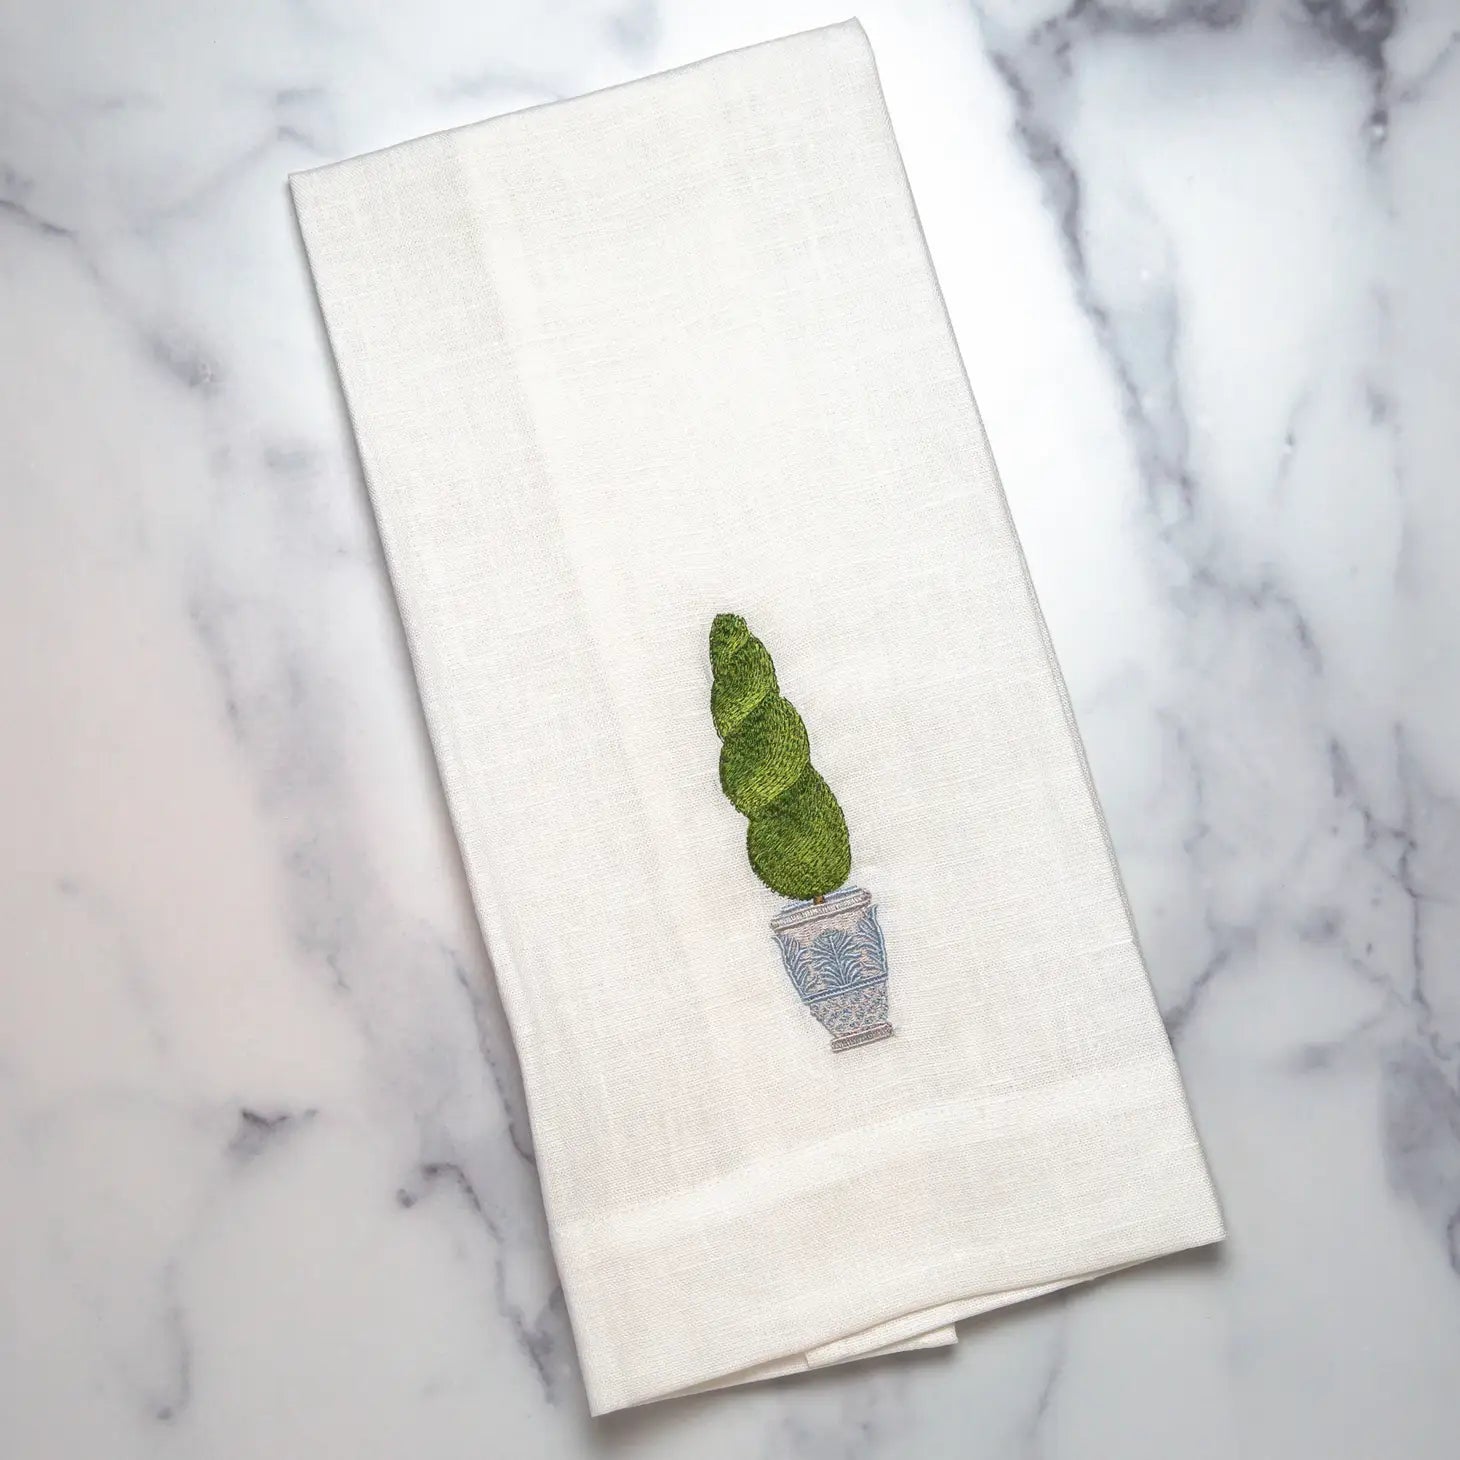 Embroidered Towel that is embroidered with tree topiary